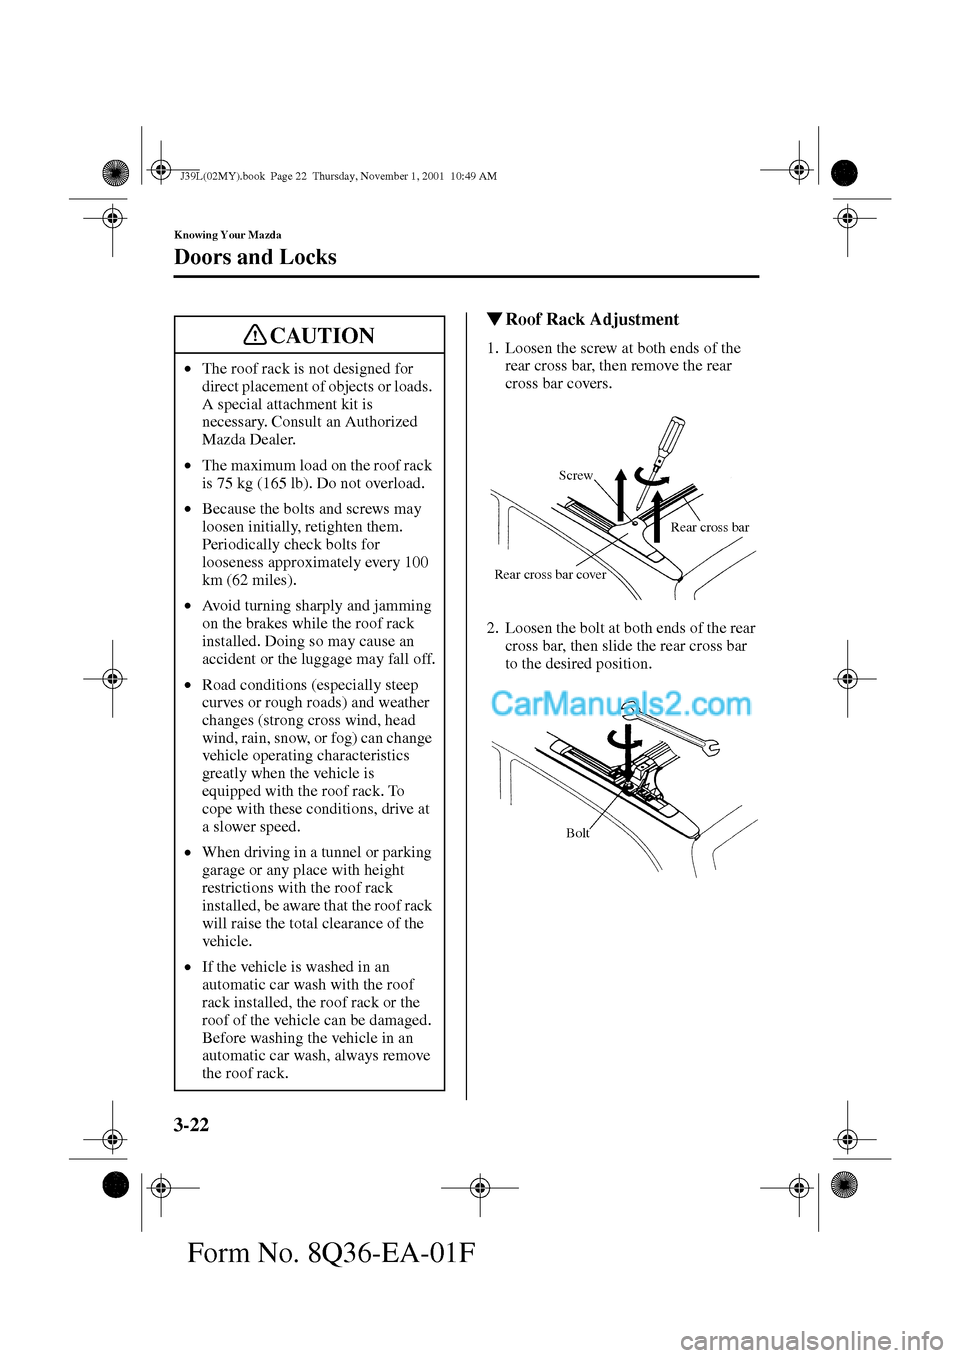 MAZDA MODEL PROTÉGÉ 2002  Owners Manual (in English) 3-22
Knowing Your Mazda
Doors and Locks
Form No. 8Q36-EA-01F
Roof Rack Adjustment
1. Loosen the screw at both ends of the 
rear cross bar, then remove the rear 
cross bar covers.
2. Loosen the bolt a